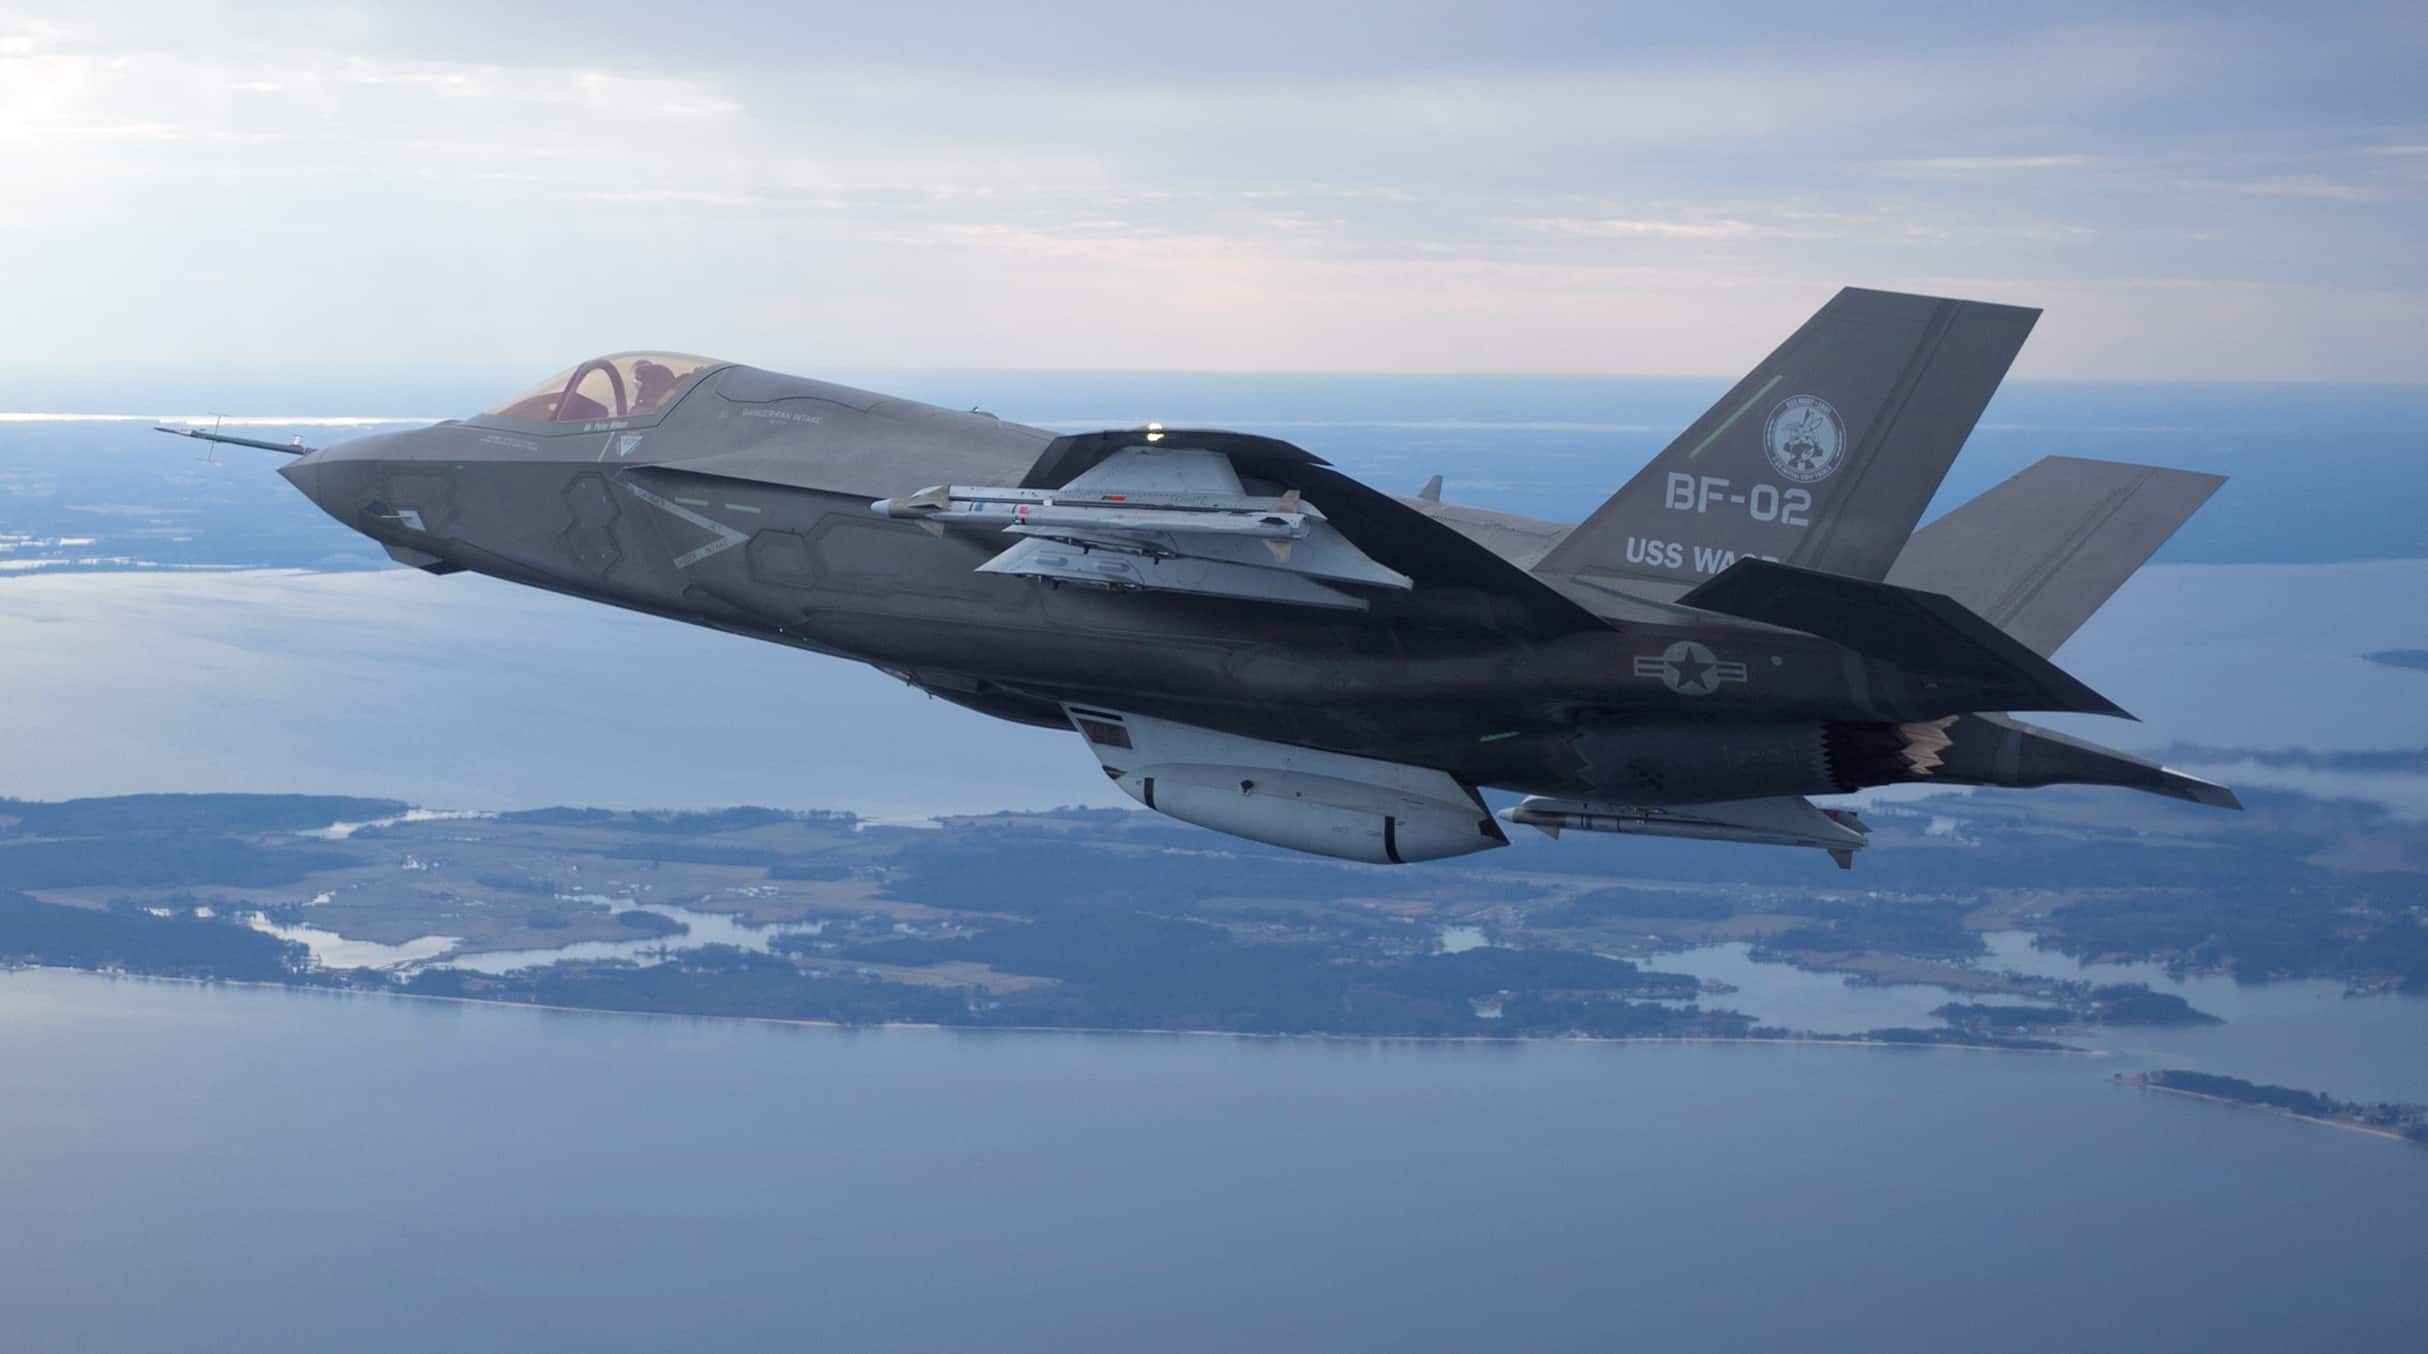 Lockheed Martin's F35 Joint Strike Fighter F-35B test aircraft BF-2 flying with external weapons